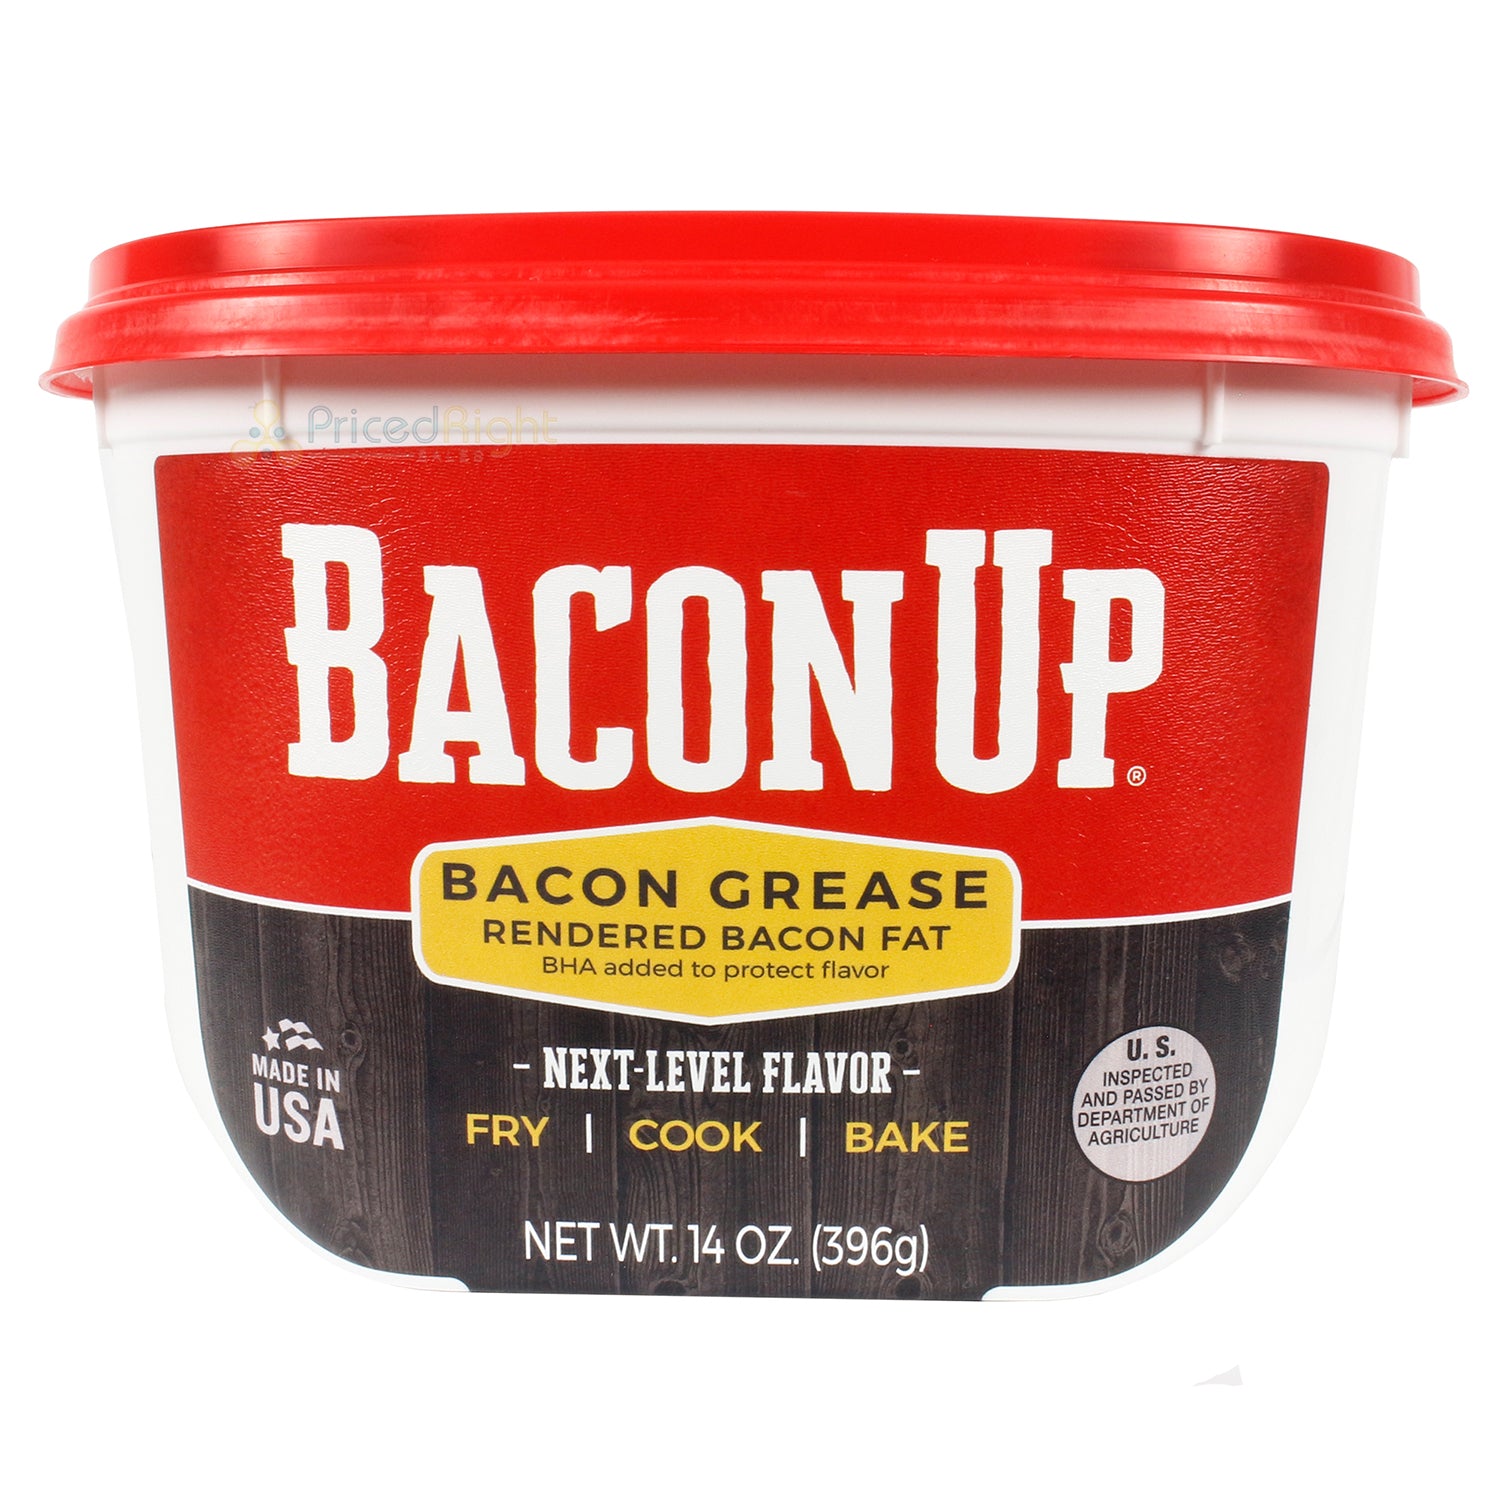 Bacon Up Bacon Grease Rendered Bacon Fat for Frying, Cooking, Baking, 14  ounces